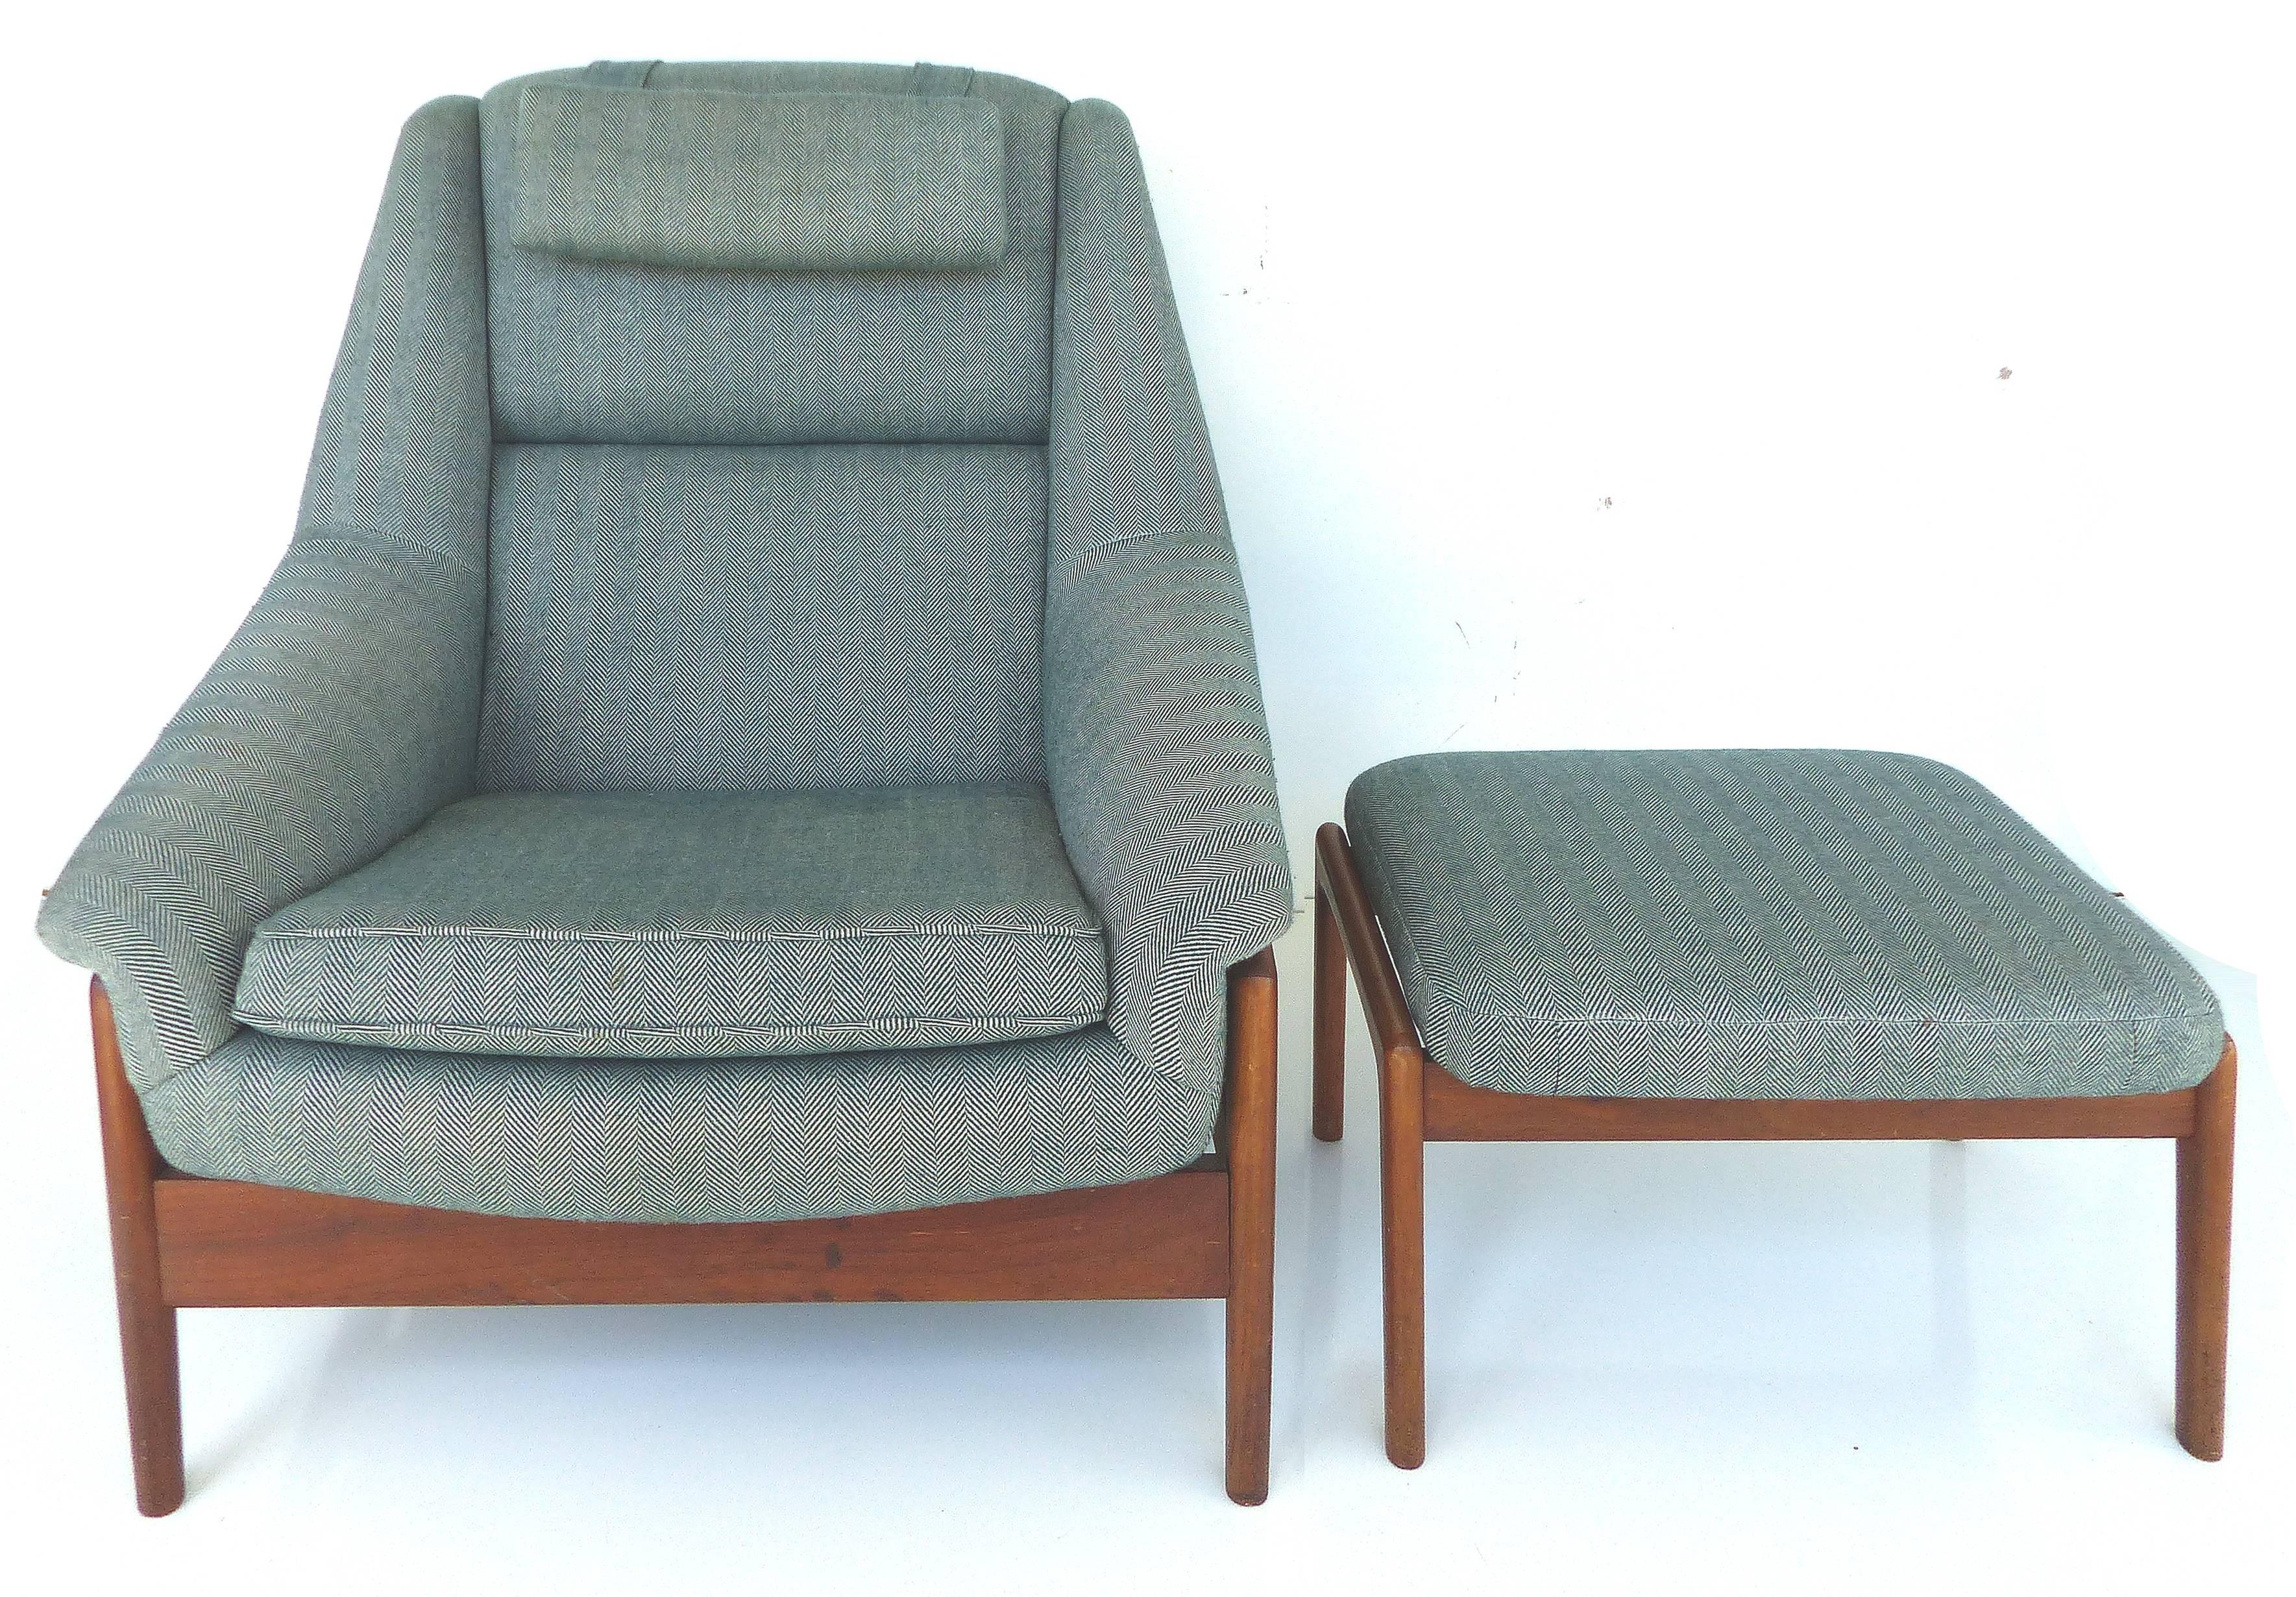 A Scandinavian reclining lounge chair and ottoman by DUX. The chair can be adjusted back in a reclining position and the ottoman is also adjustable. The pair are upholstered in a soft herringbone pattern. Removable headrest pillow drapes over the